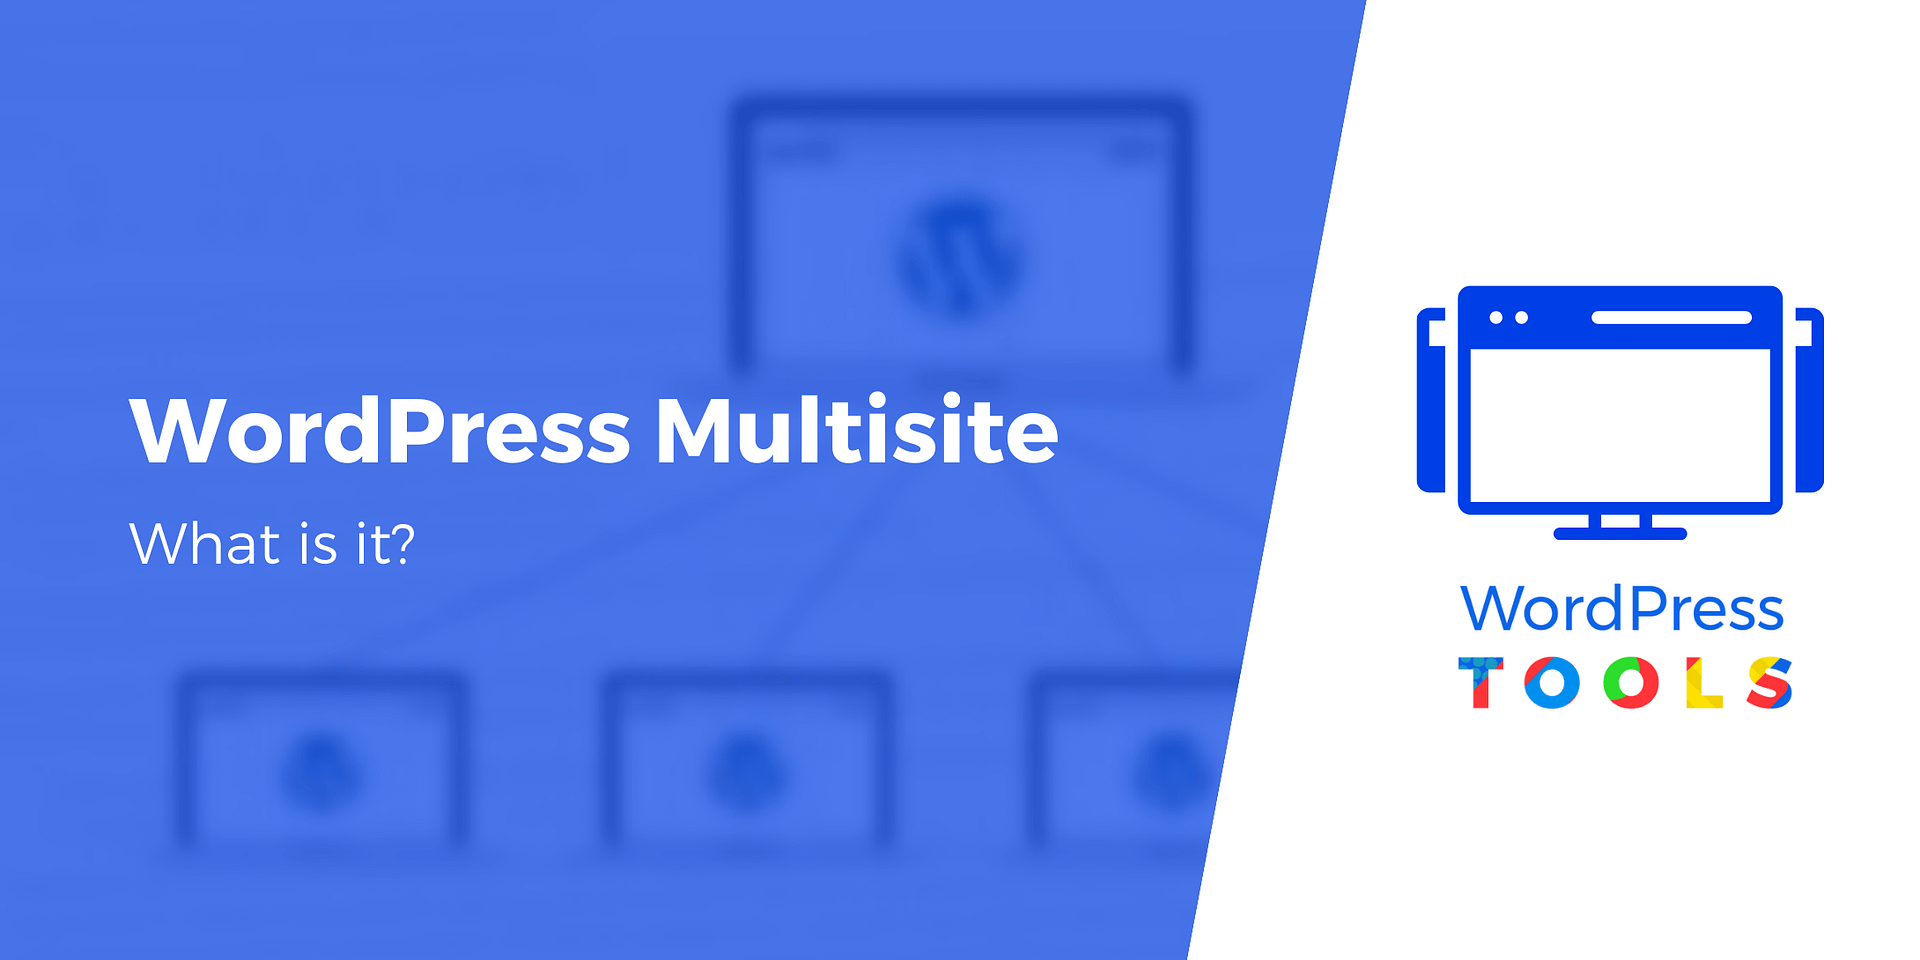 An Introduction to WordPress Multisite - What Is WordPress Multisite?